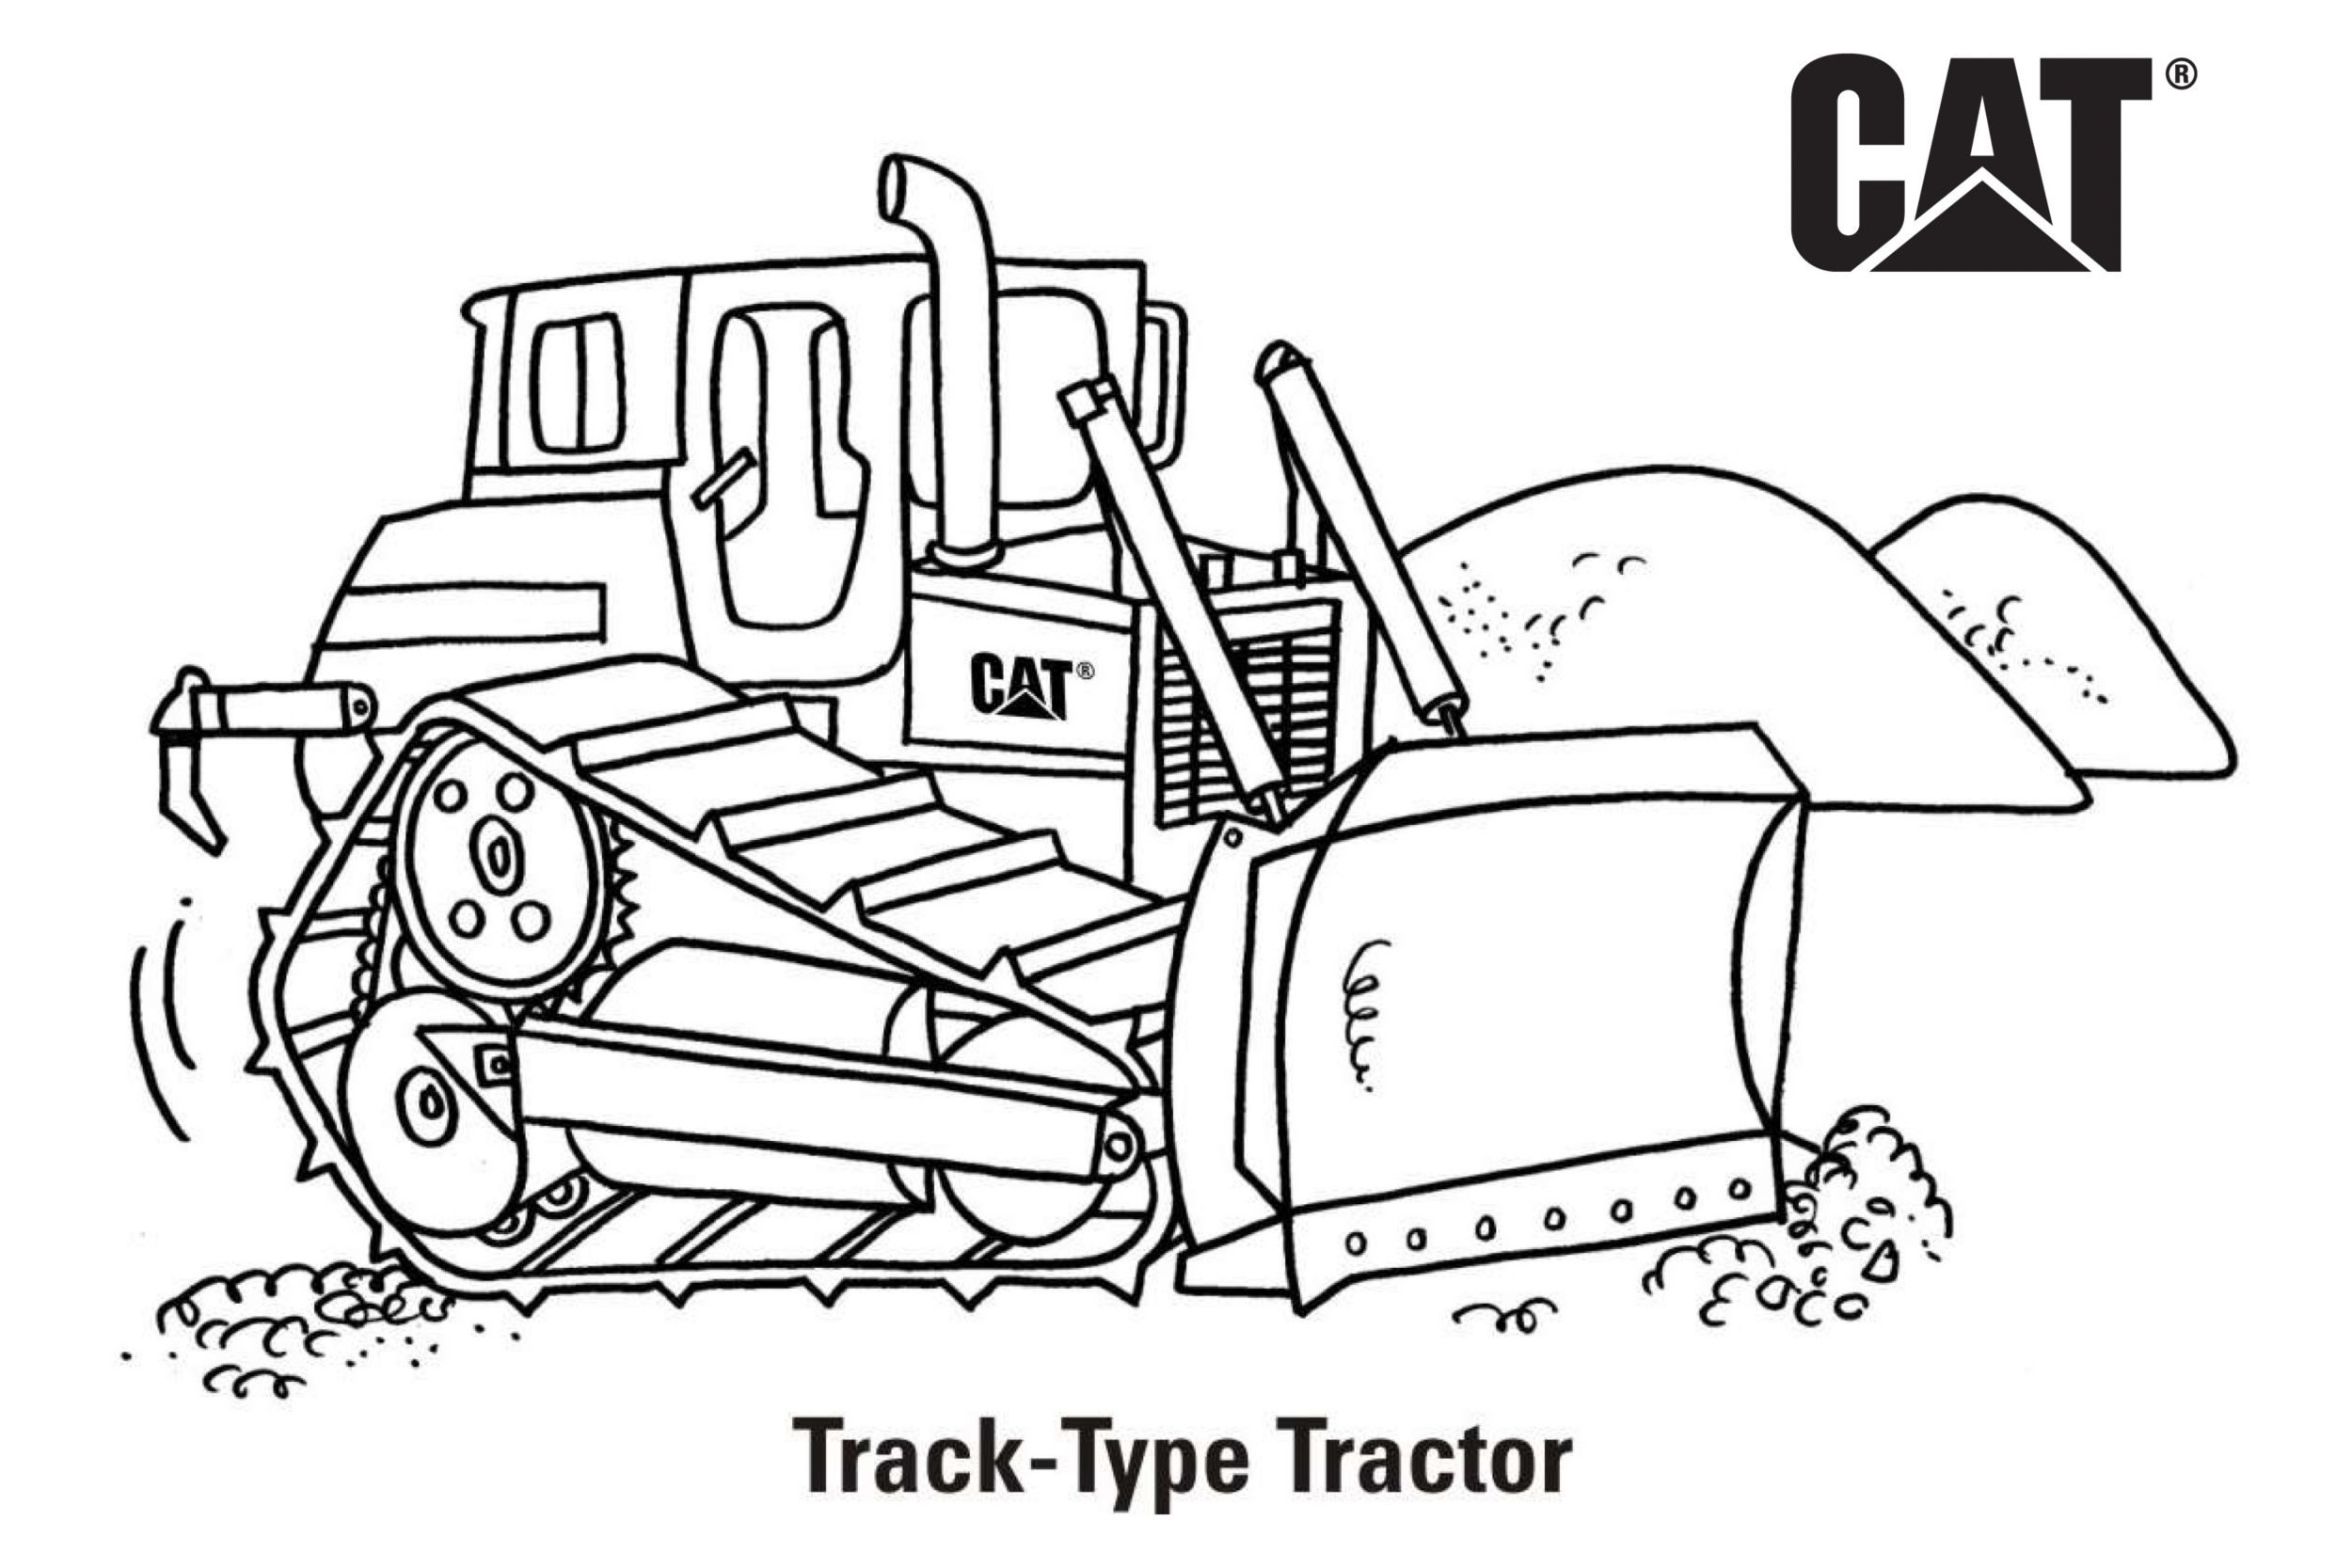 Track Type Tractor coloring page